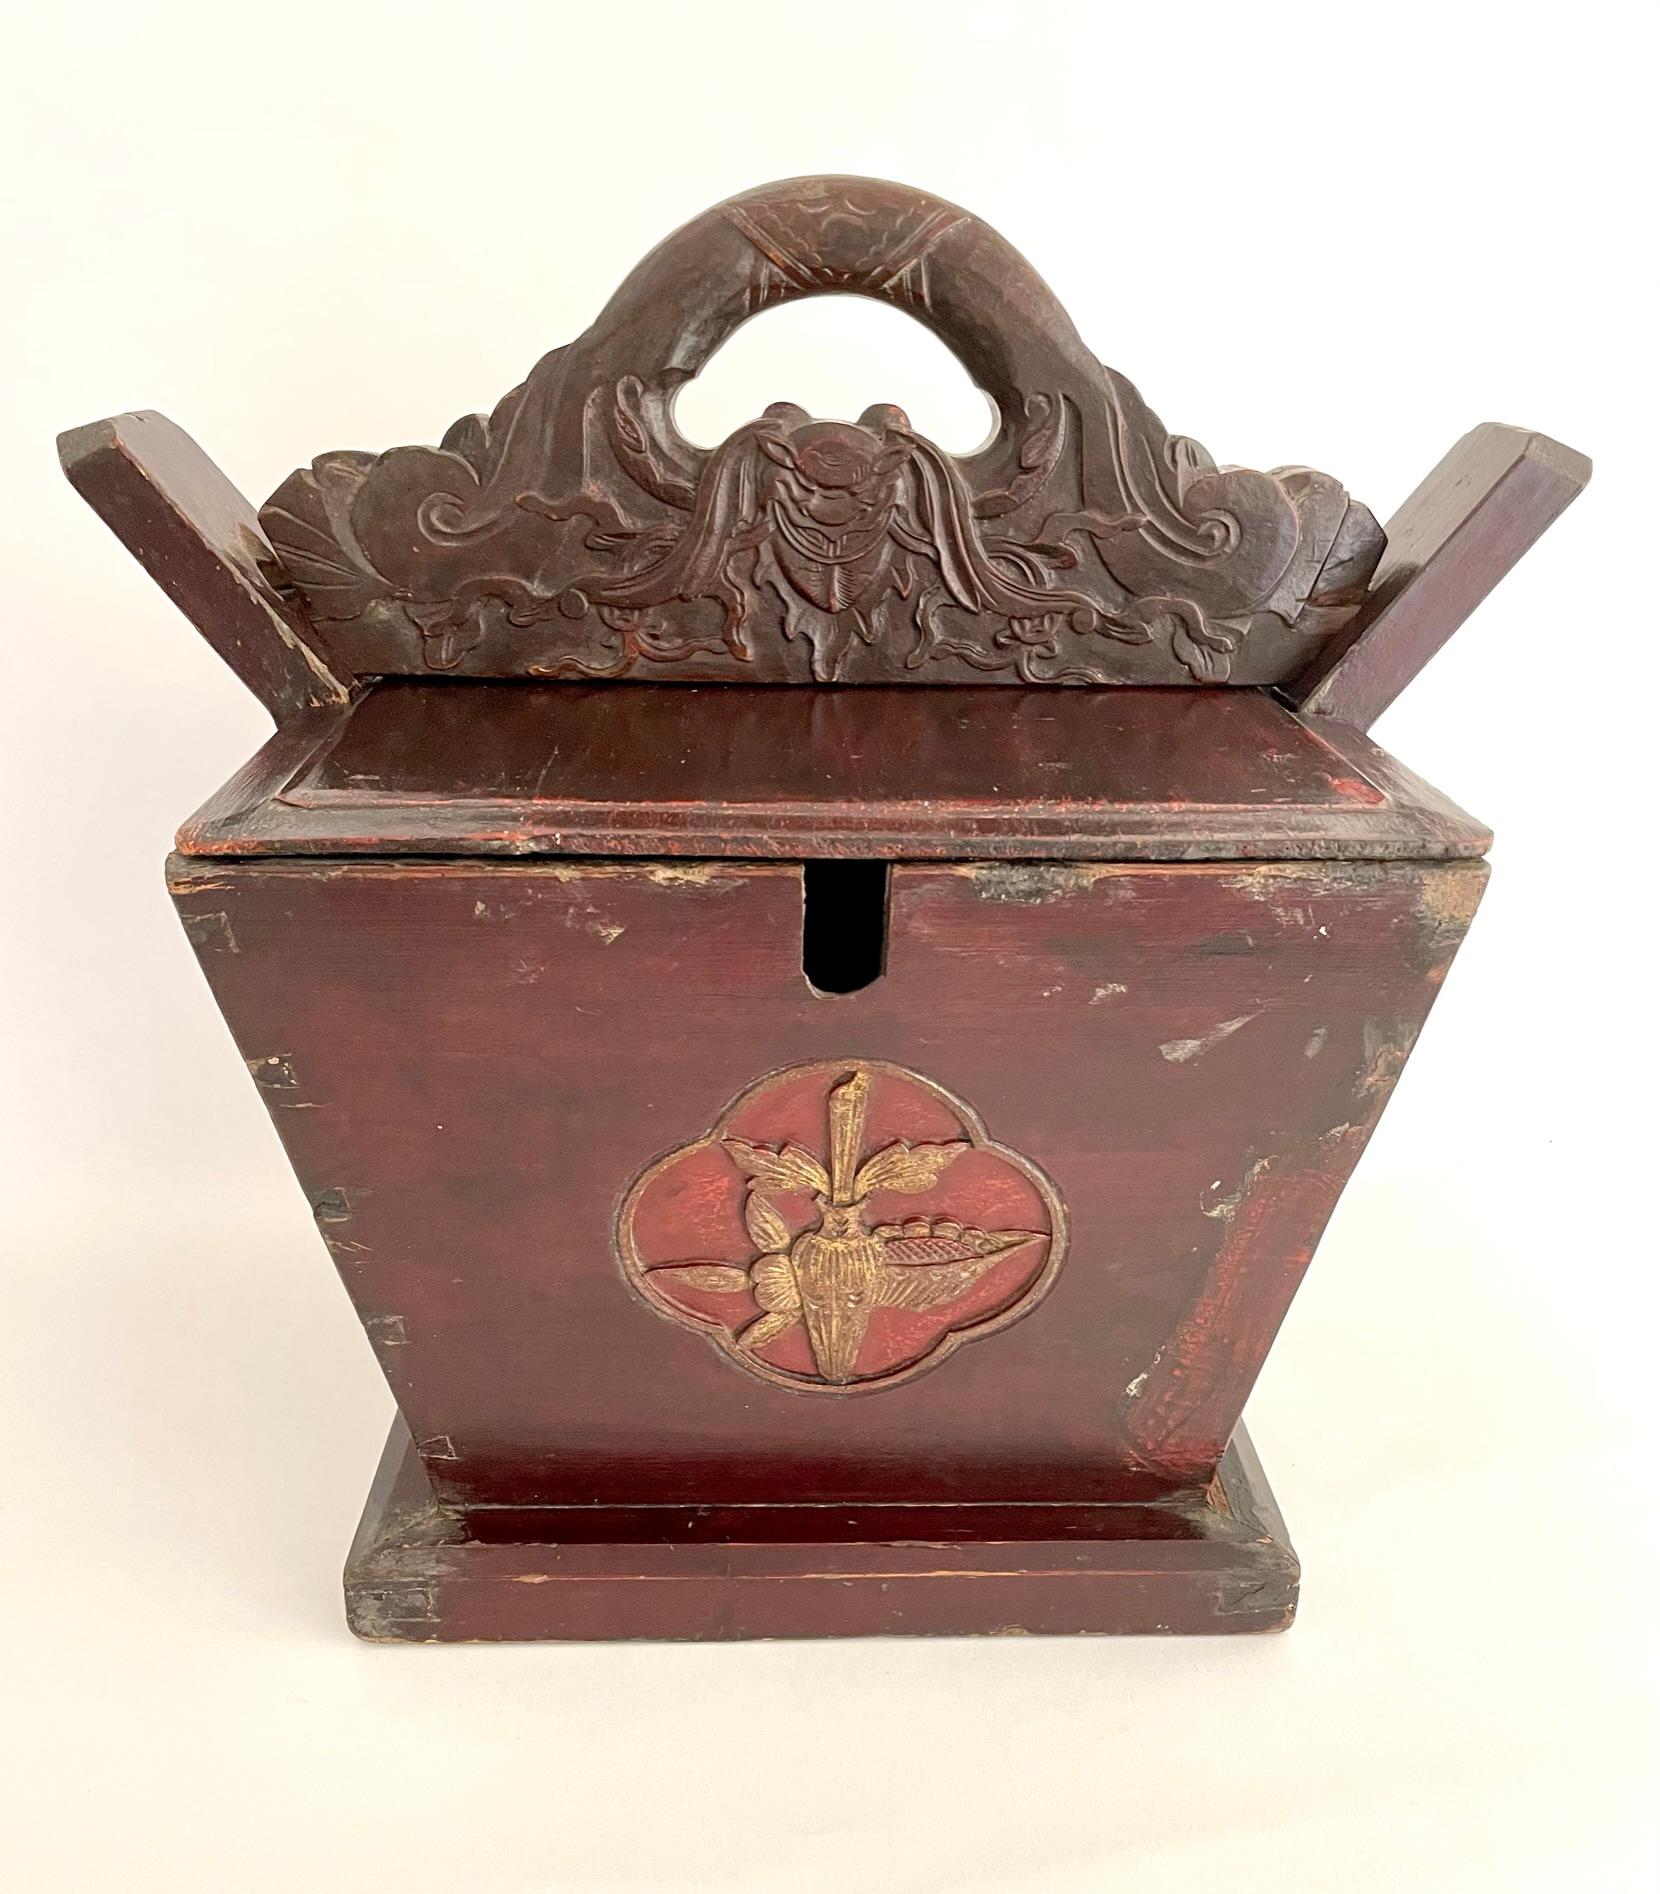 Beautifully carved Qing dynasty tea caddy from Elmwood (yumu), with floral motifs and finished with an oxblood color lacquer. The handle has a finely carved bat motif, which symbolizes good fortune. The large size is very usual and was used in a